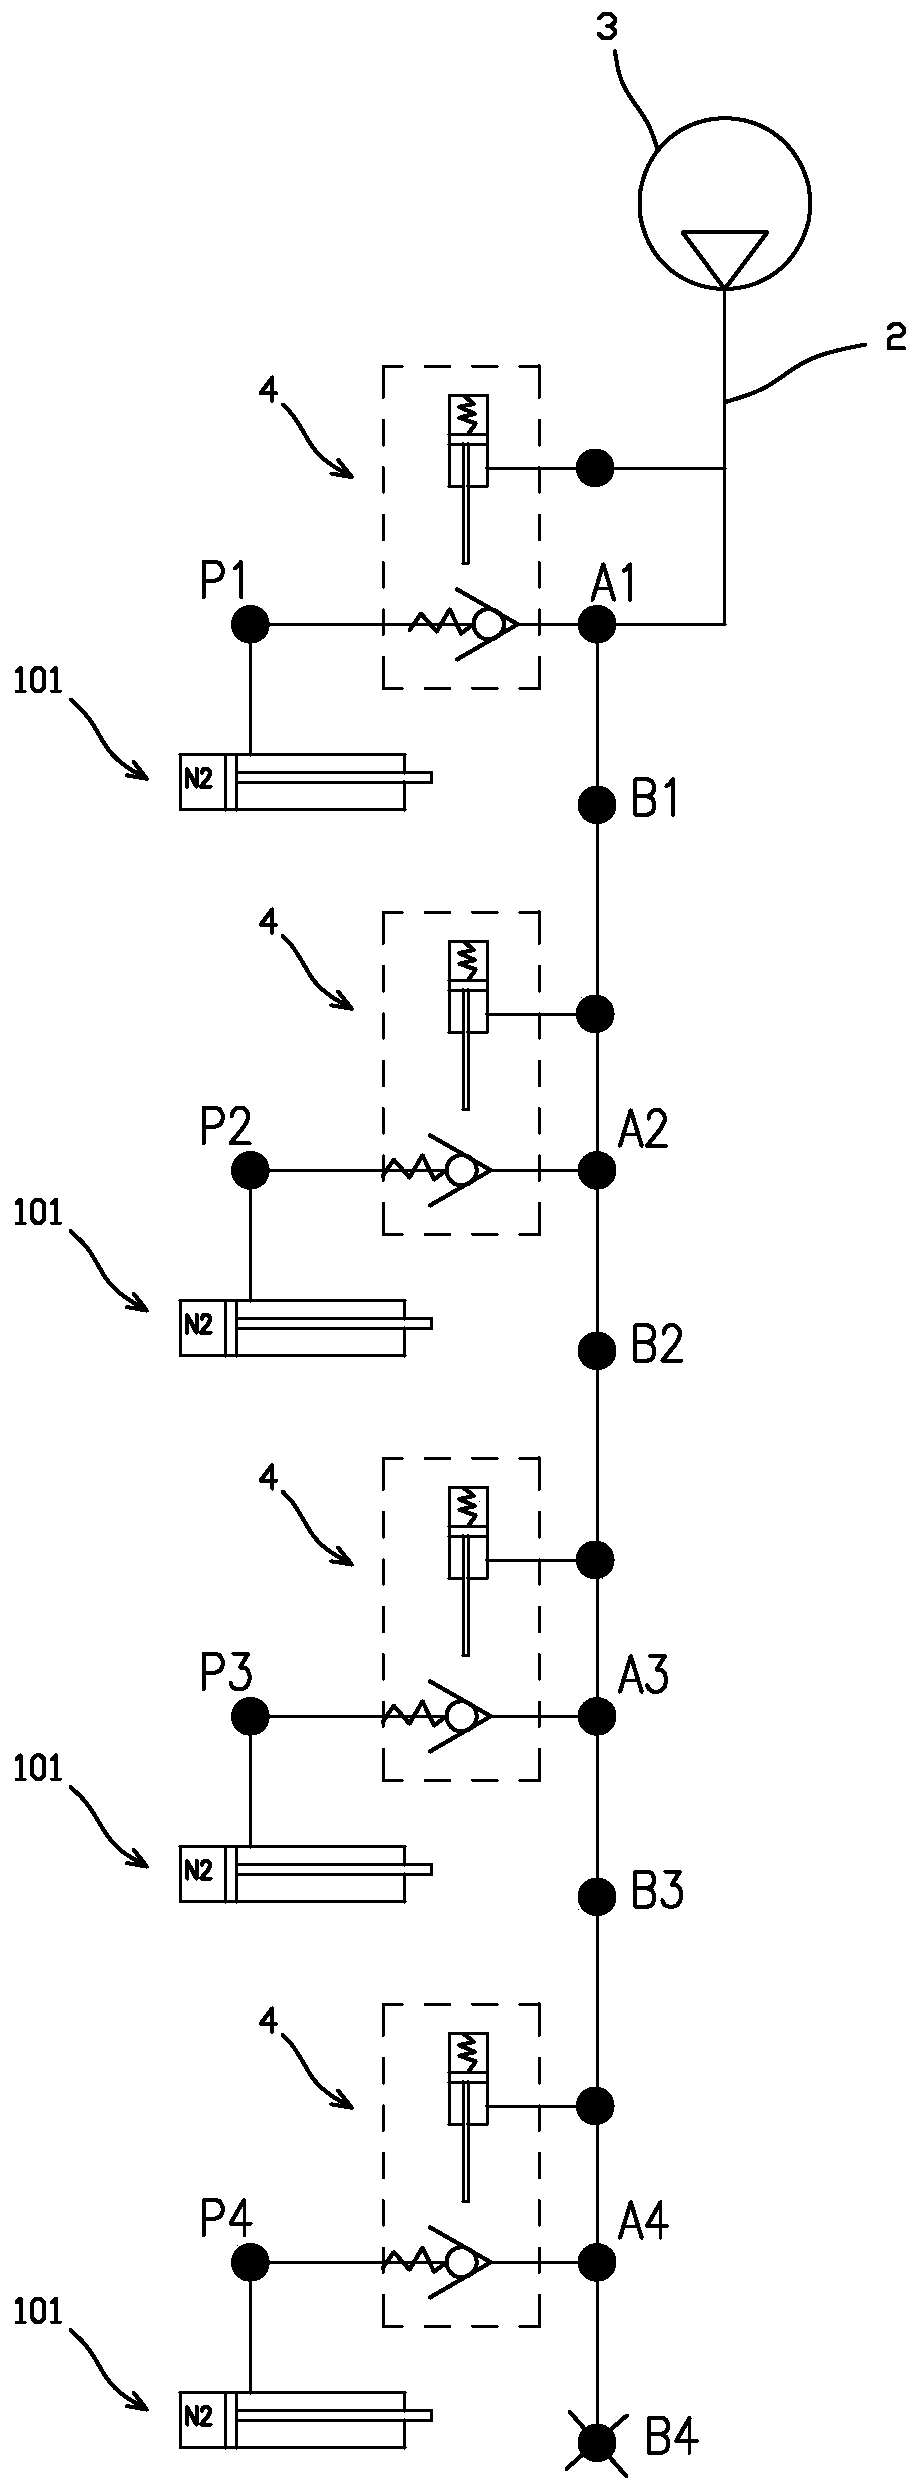 Self-balancing hydraulic lifting supporting device and application thereof